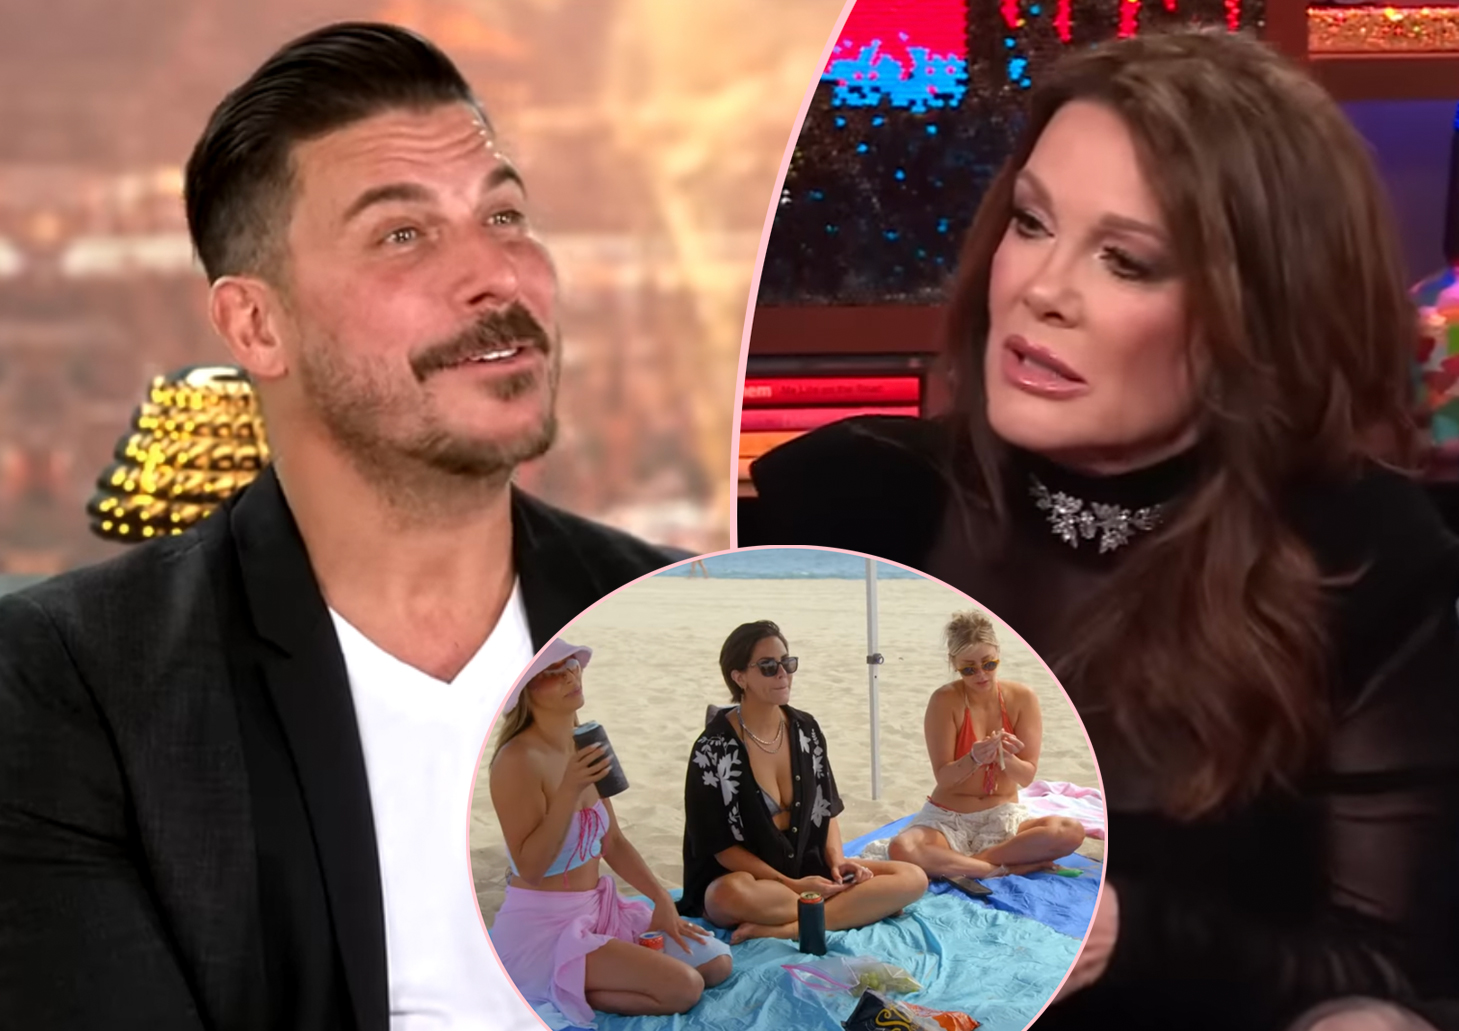 Jax Taylor Goes OFF About Vanderpump Rules! Claims The Show Is ‘Scripted’ Now!